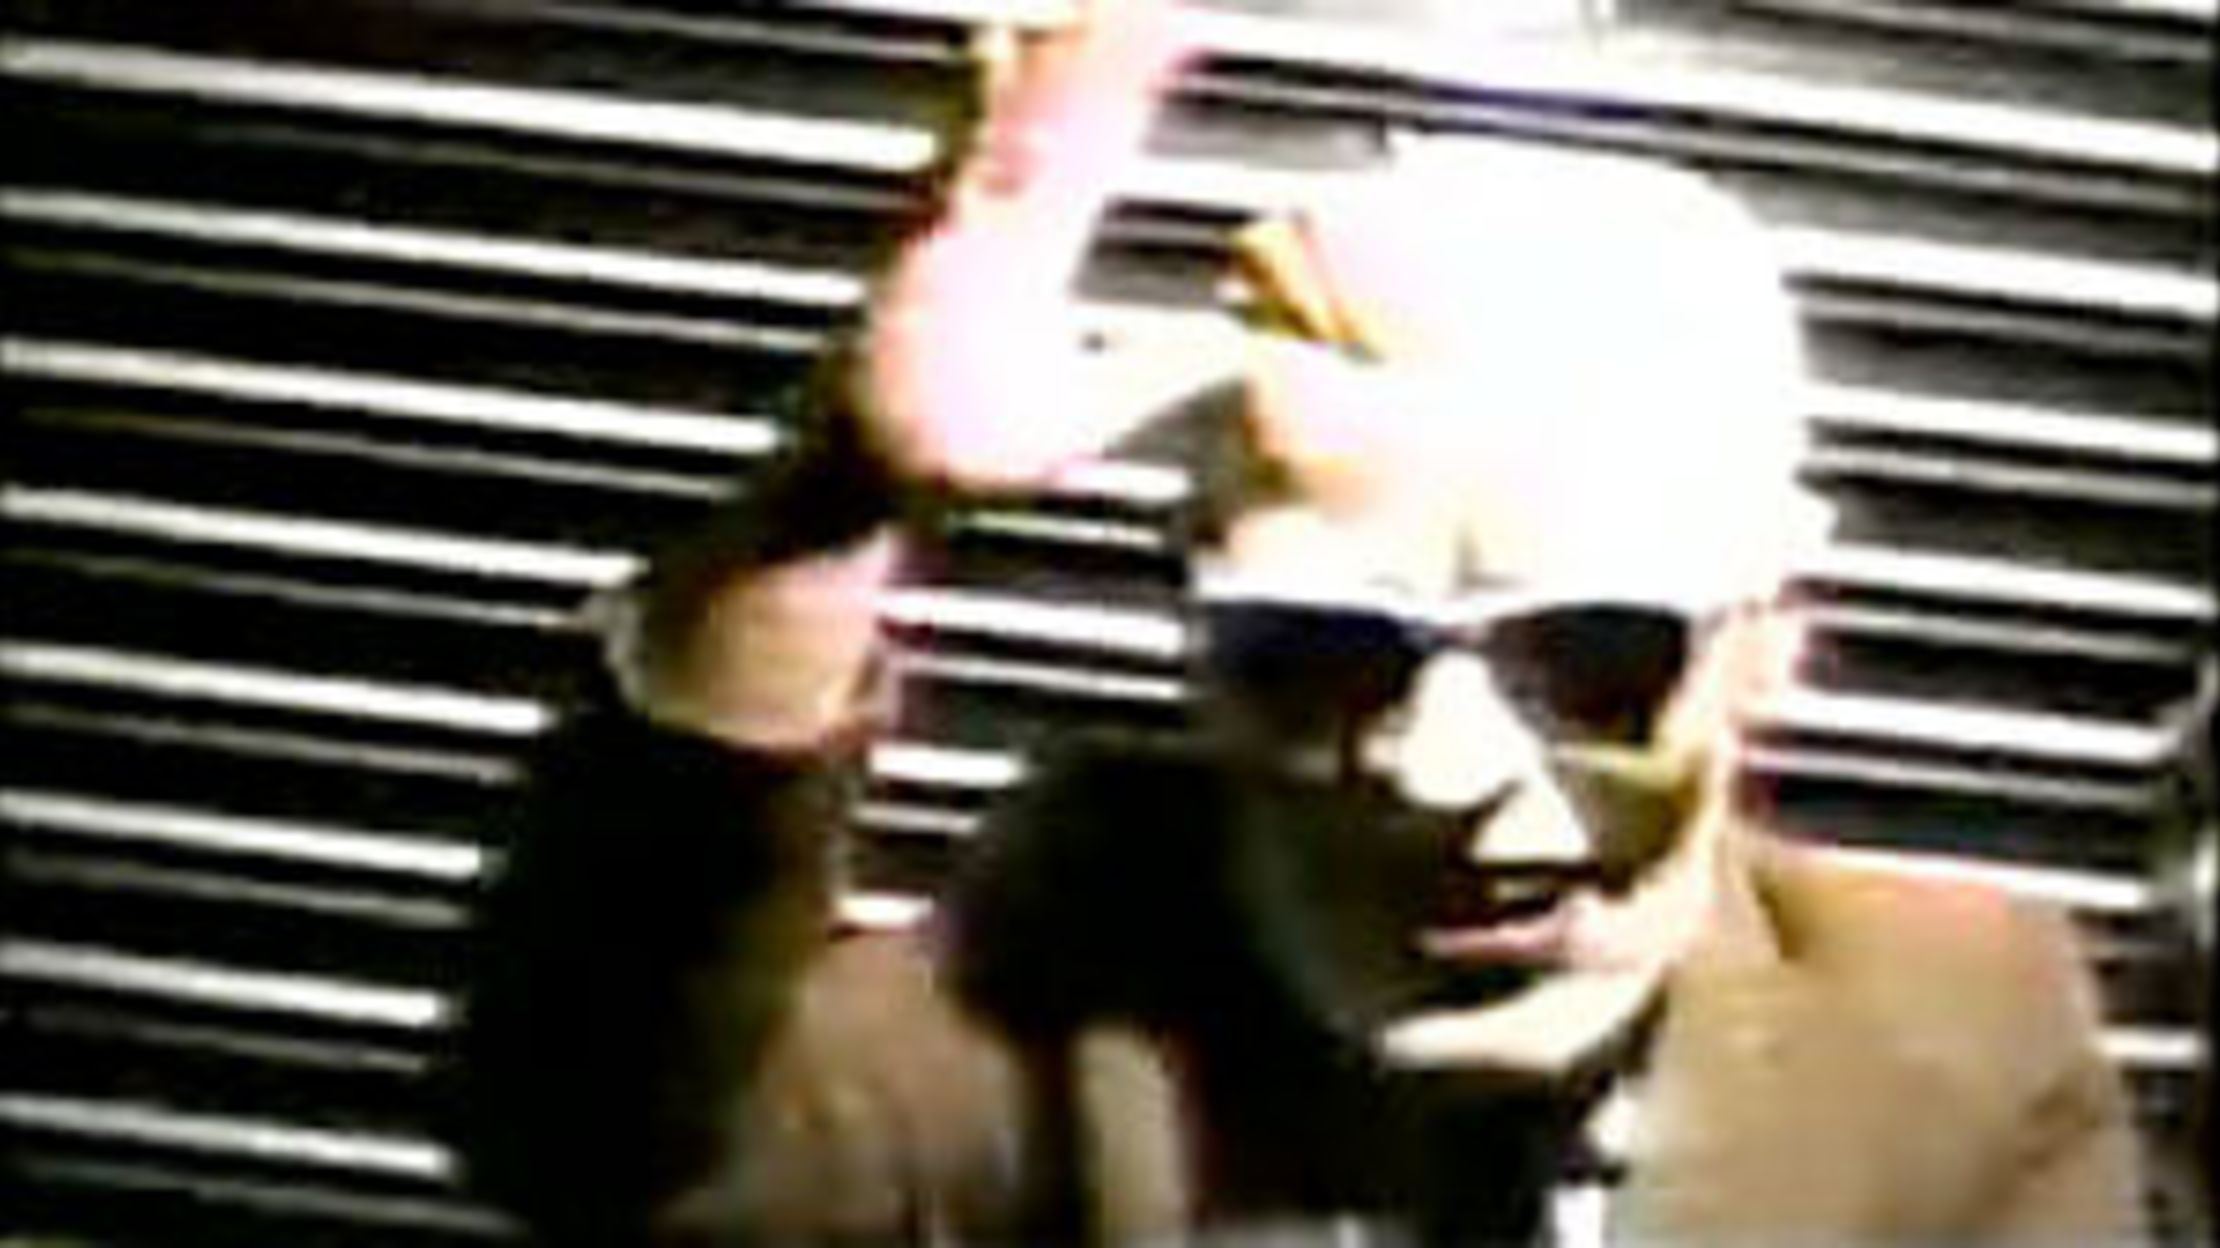 who is max headroom